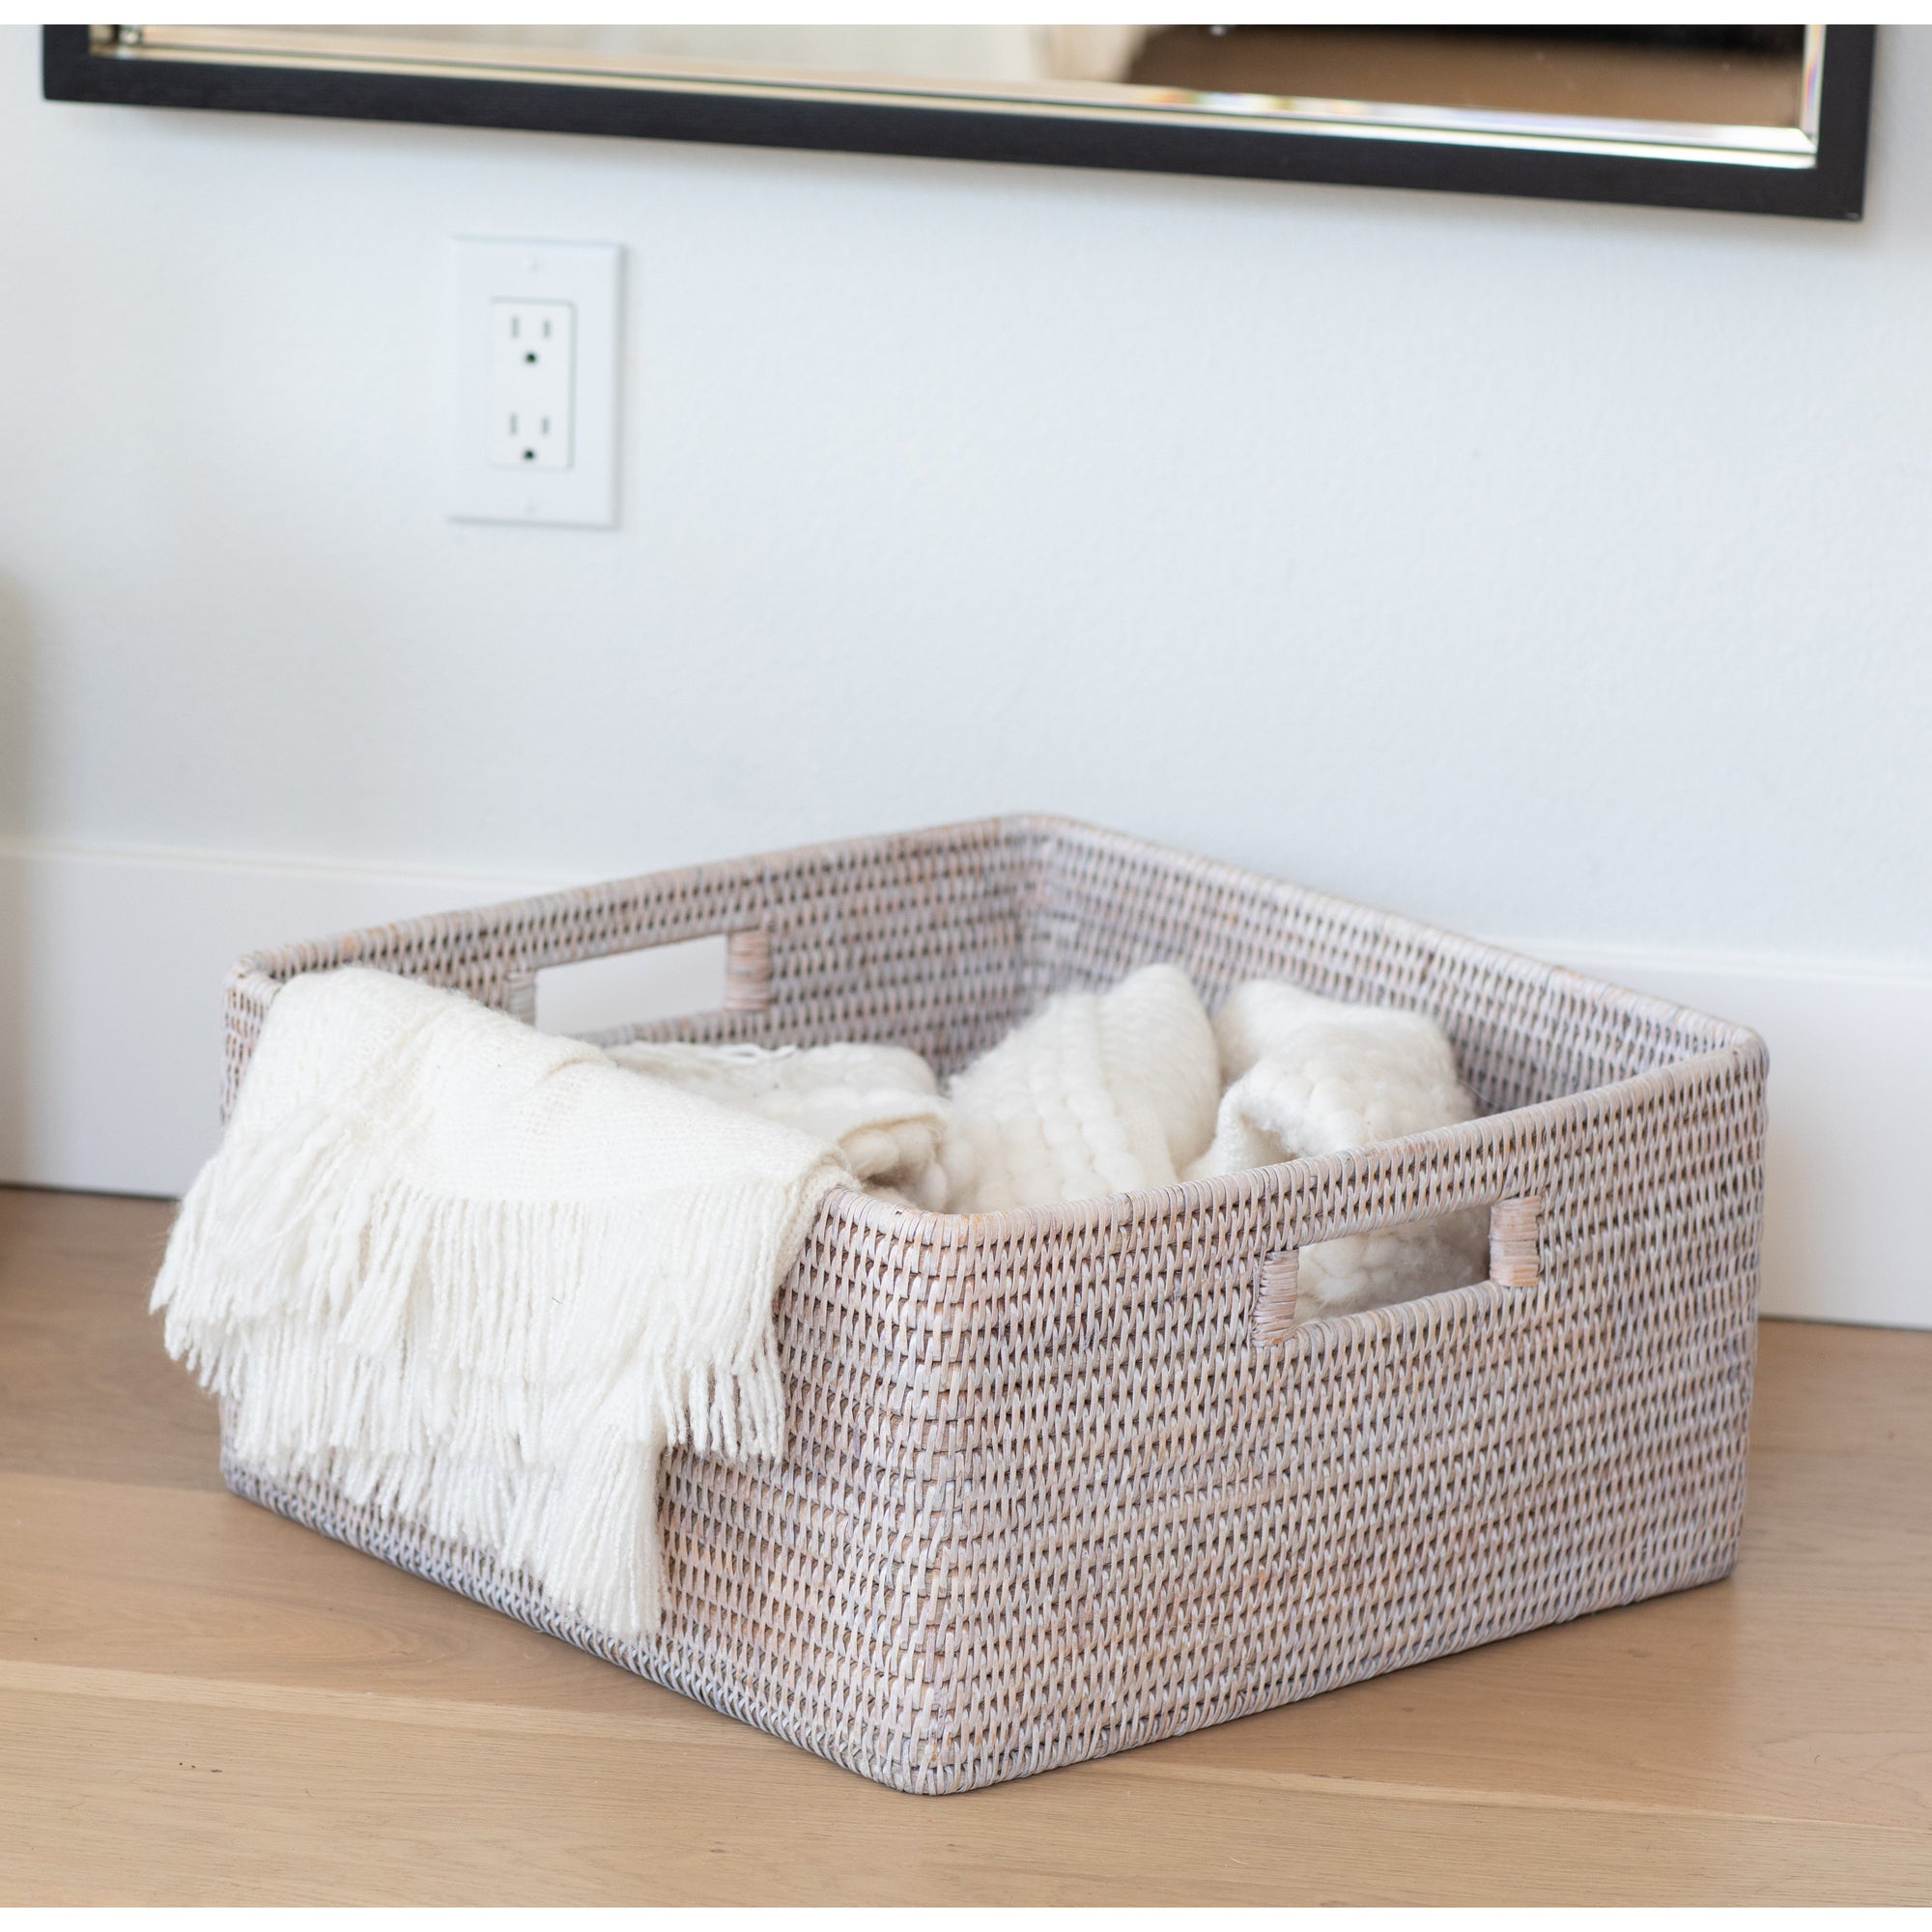 Square storage basket with rounded corners white wash